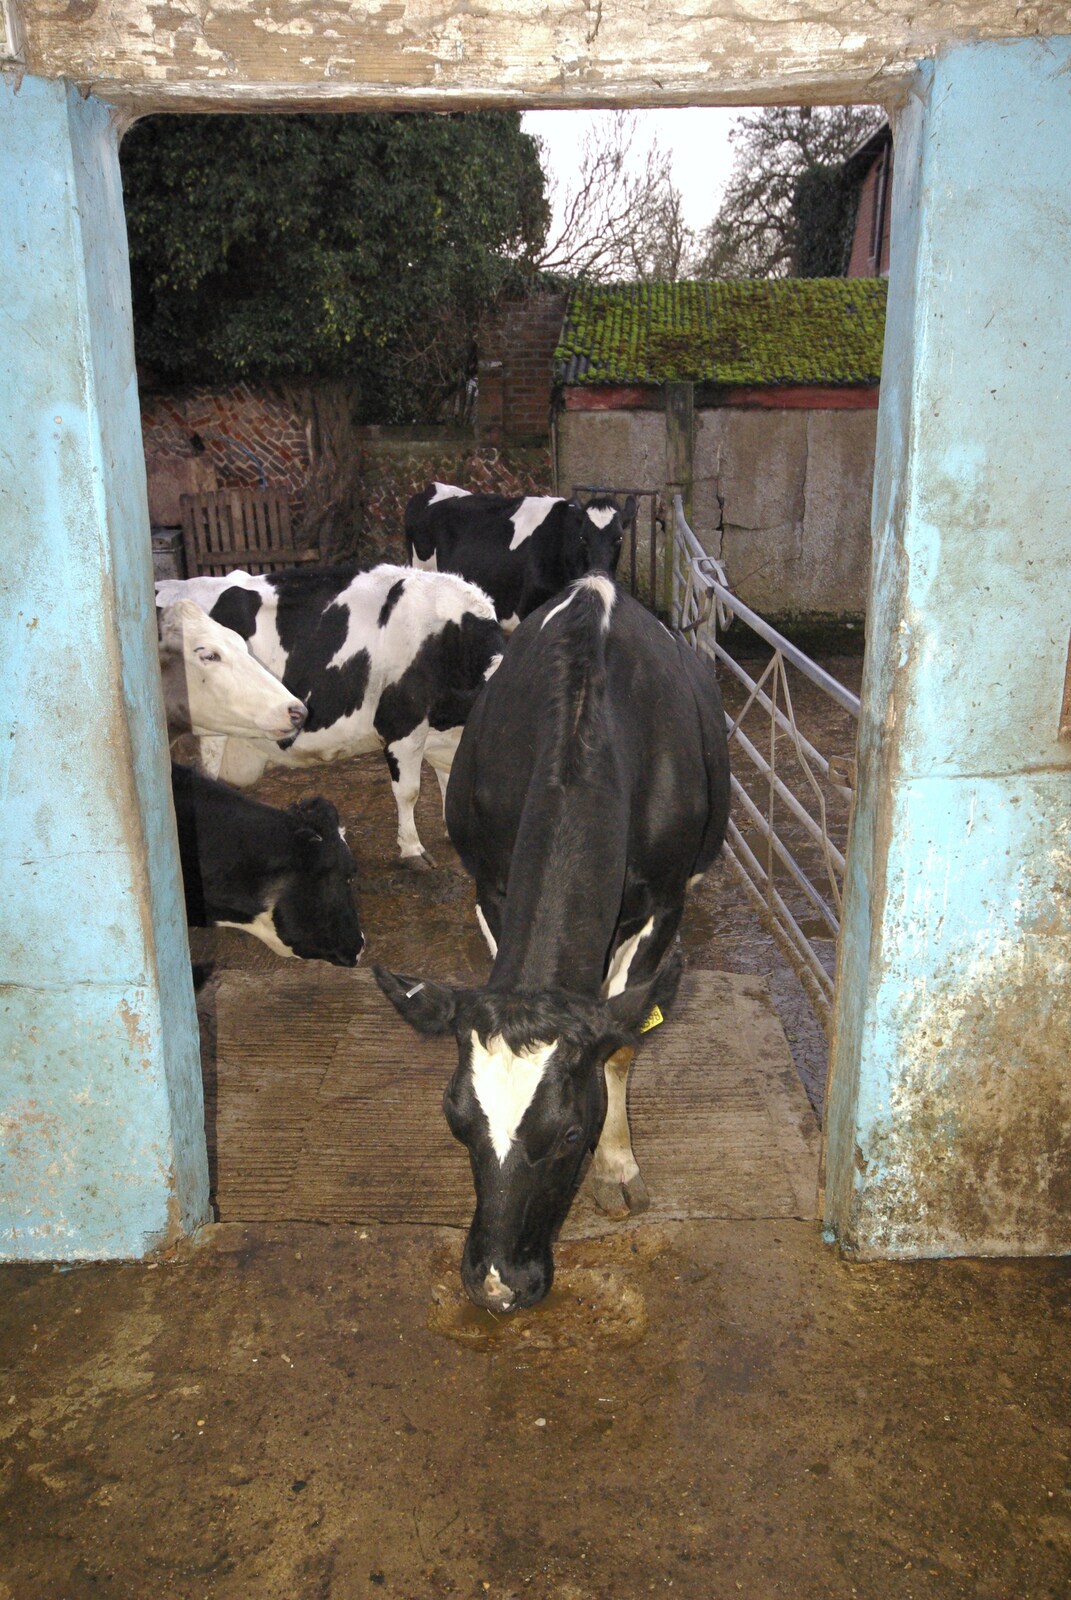 Cows wander into the milking shed from The Last Milking at Dairy Farm, Thrandeston, Suffolk - 11th January 2007